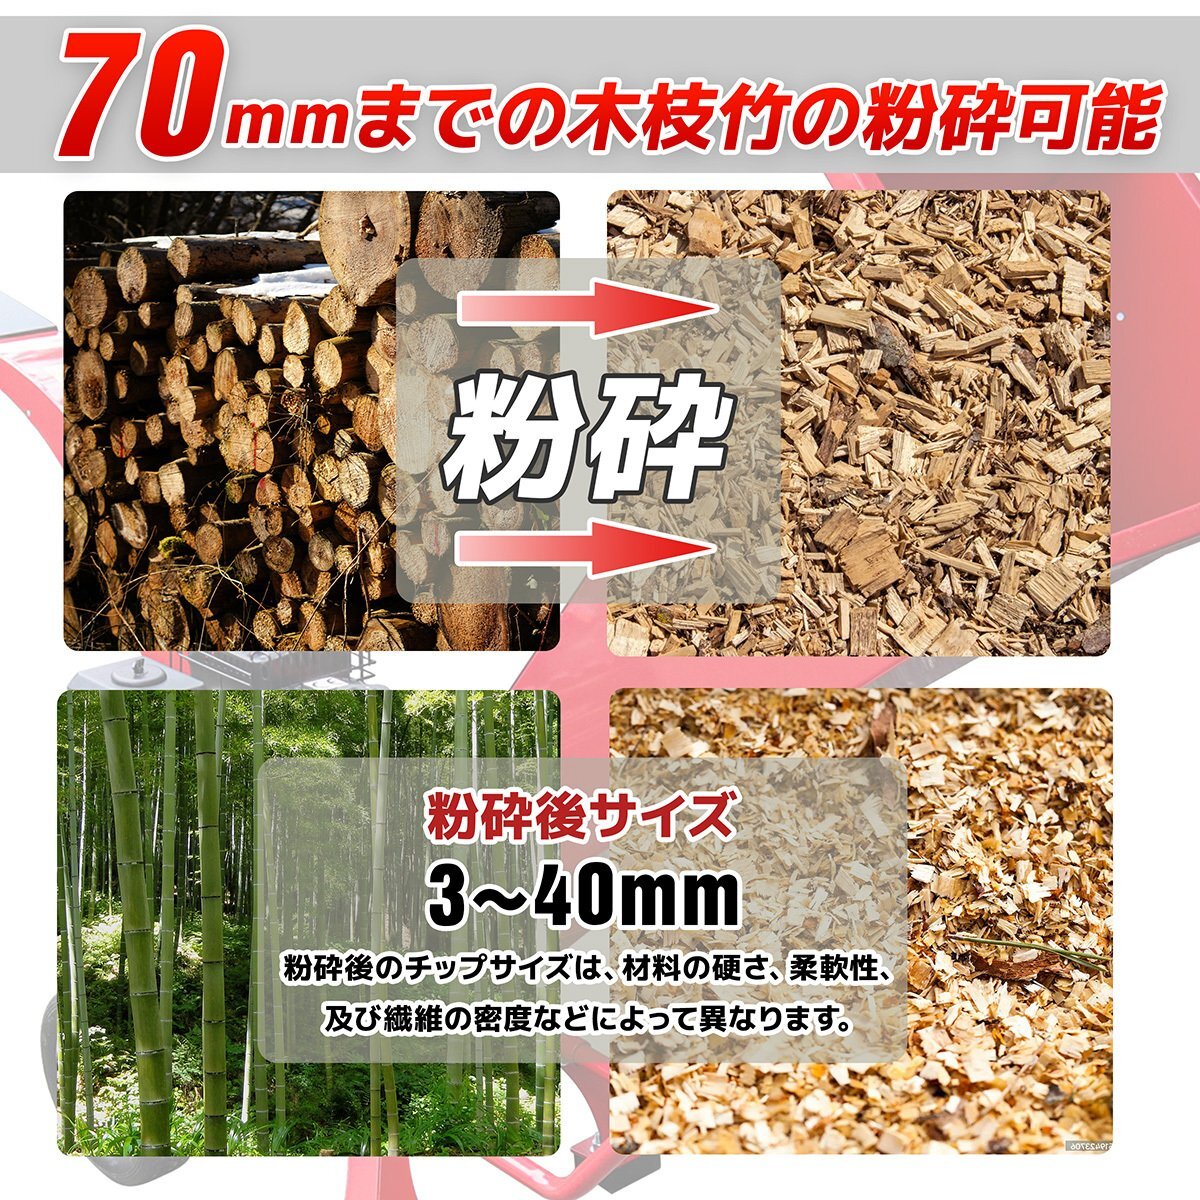 [ business office stop ] engine crushing machine wood chipper +[ change blade set ]*7.5 horse power * maximum processing diameter 70mm bamboo * tree agriculture Japanese instructions 